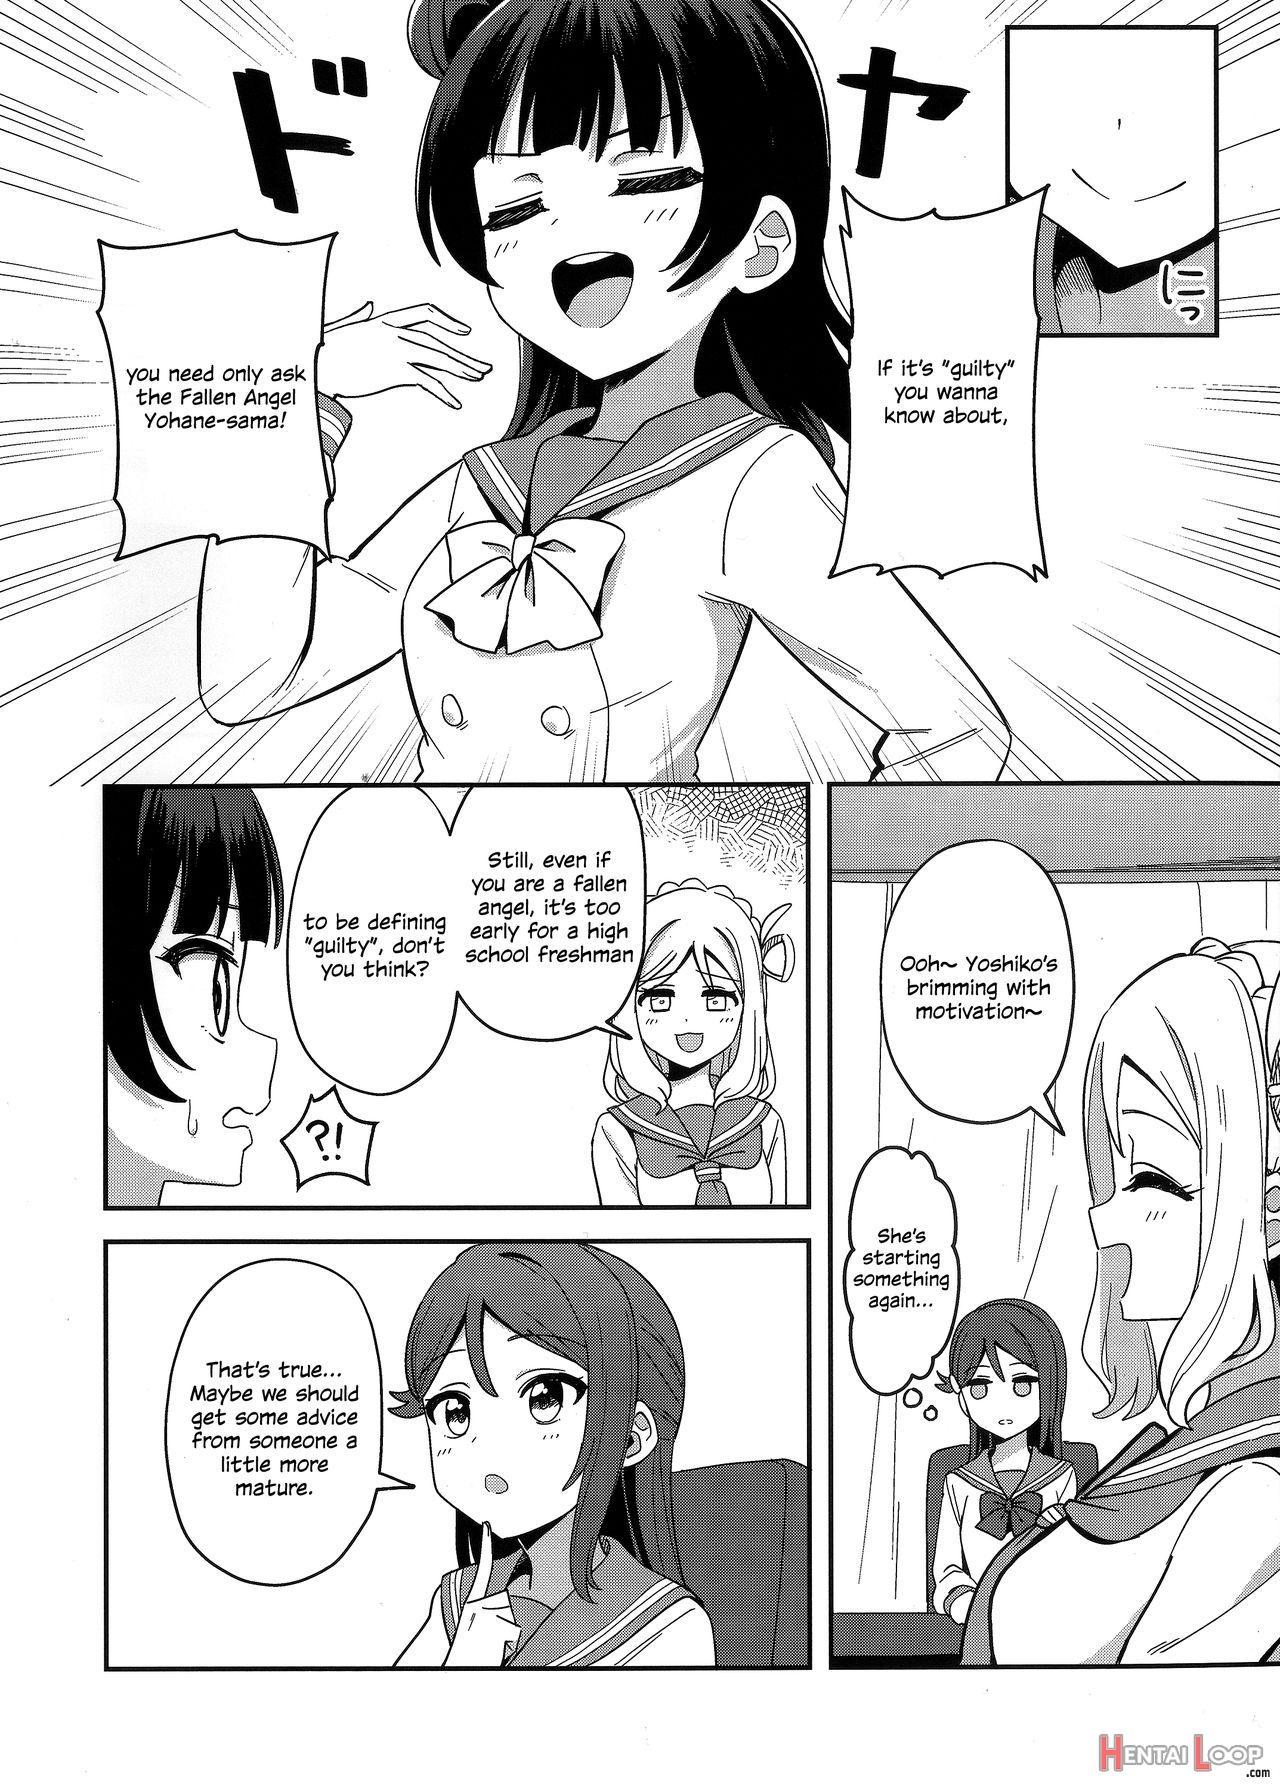 Fallen Angel-sama, Is This Guilty Too? page 3